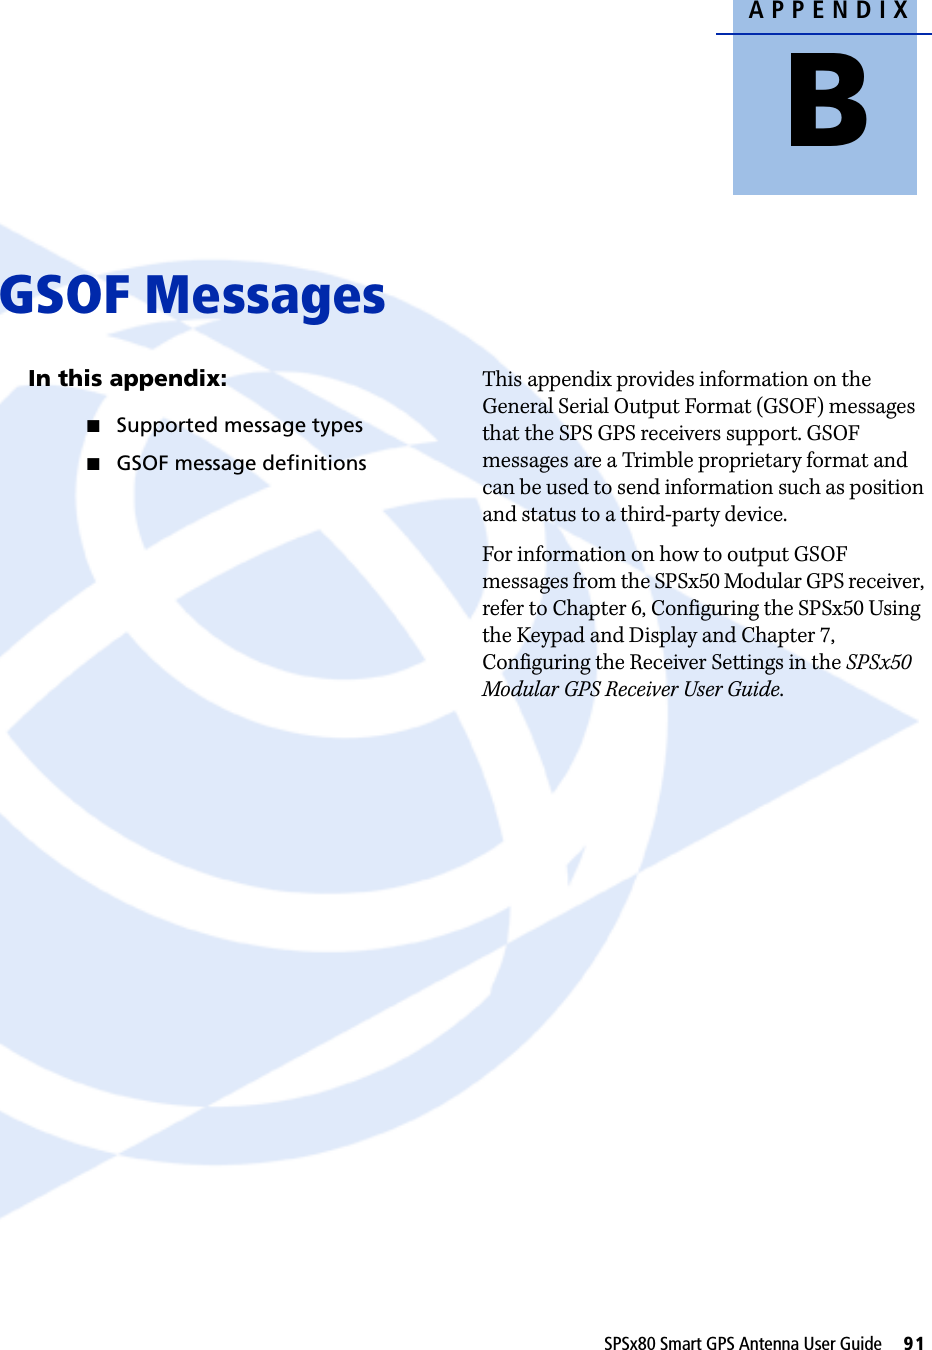 APPENDIXBSPSx80 Smart GPS Antenna User Guide     91     GSOF Messages BIn this appendix:QSupported message typesQGSOF message definitionsThis appendix provides information on the General Serial Output Format (GSOF) messages that the SPS GPS receivers support. GSOF messages are a Trimble proprietary format and can be used to send information such as position and status to a third-party device.For information on how to output GSOF messages from the SPSx50 Modular GPS receiver, refer to Chapter 6, Configuring the SPSx50 Using the Keypad and Display and Chapter 7, Configuring the Receiver Settings in the SPSx50 Modular GPS Receiver User Guide.